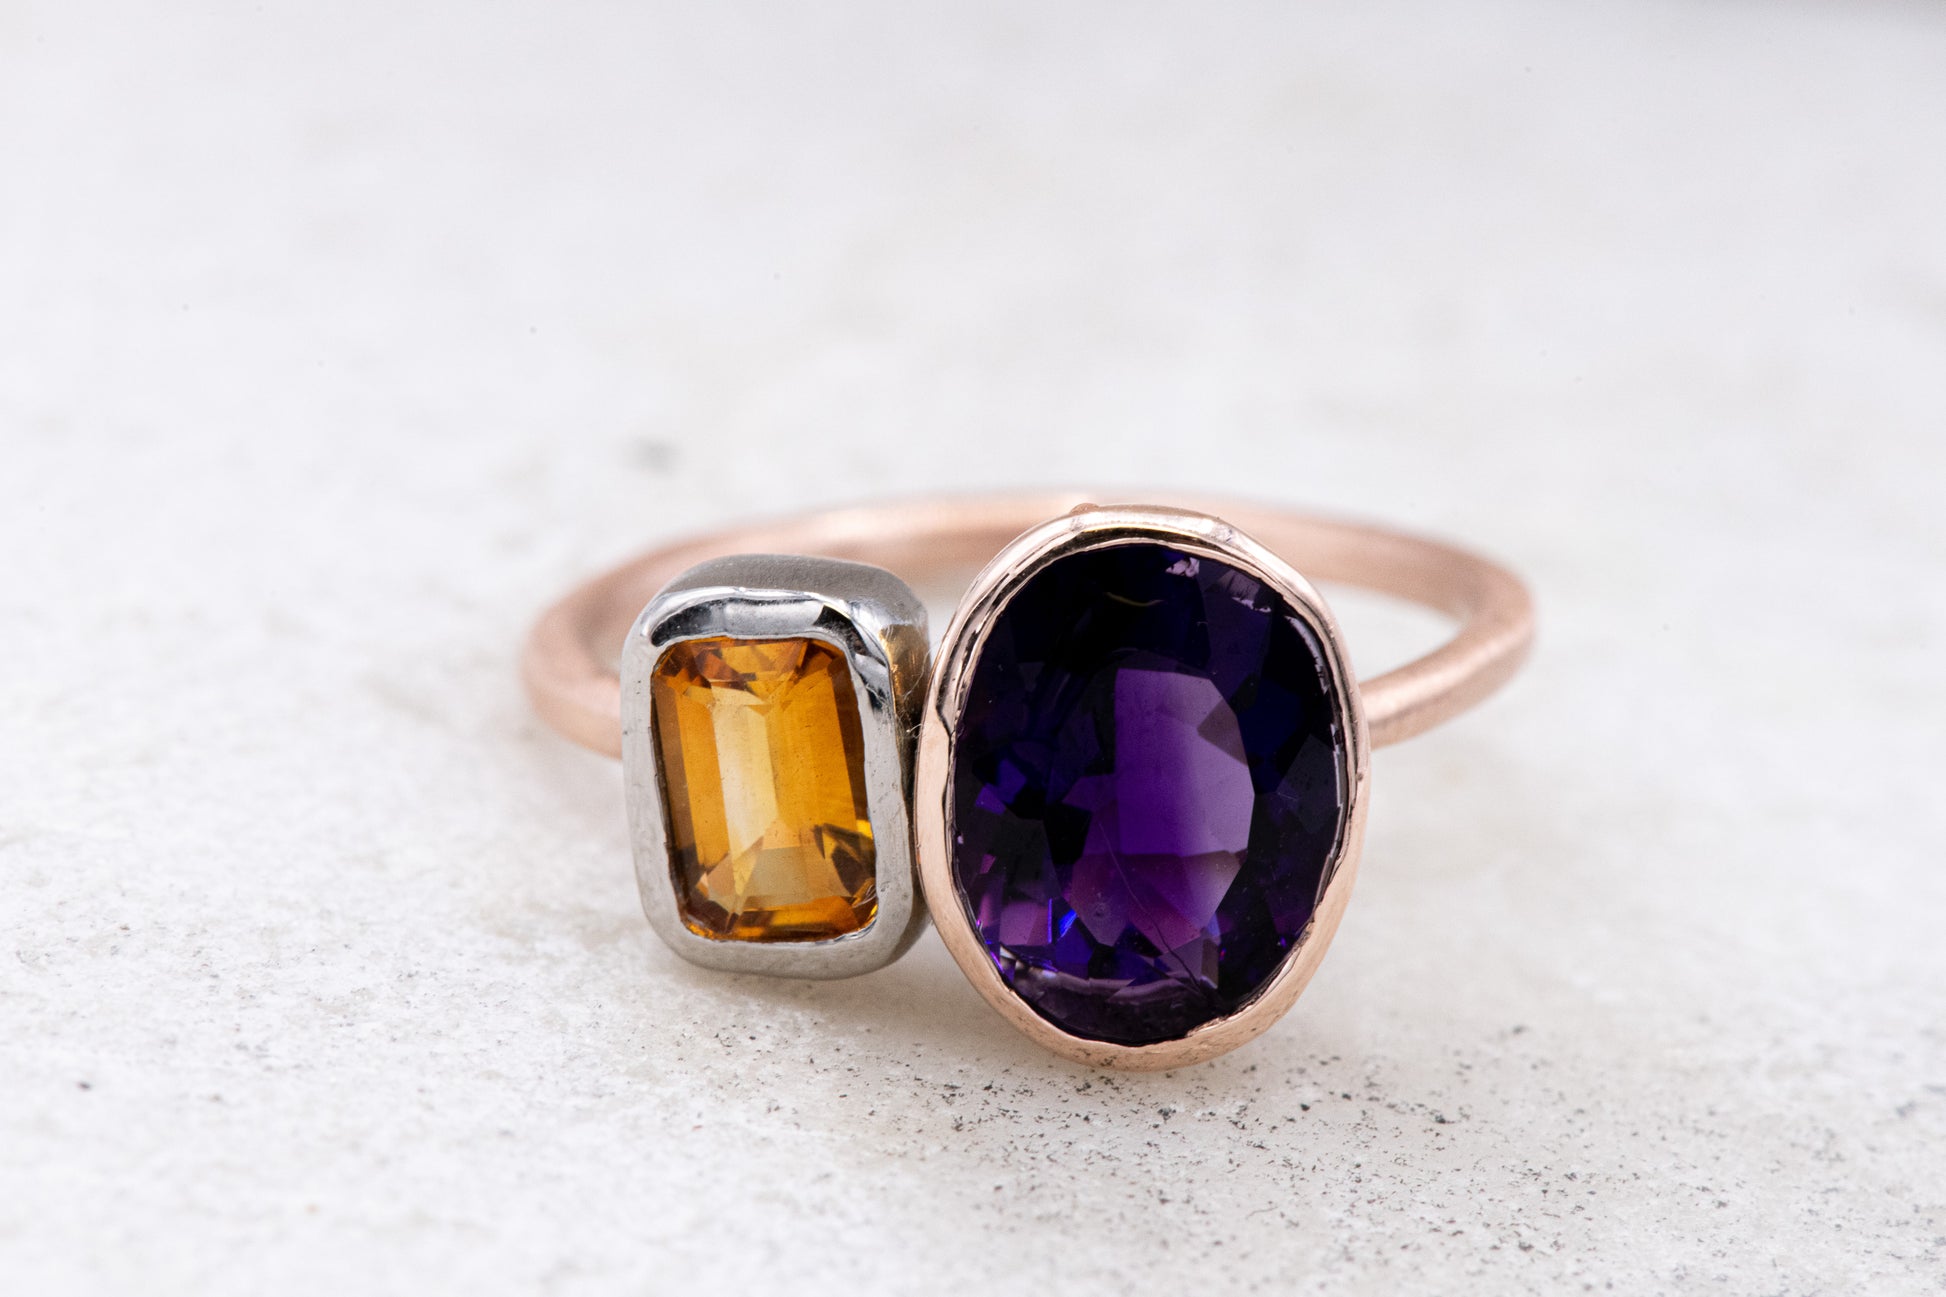 Asymmetrical Amethyst and Citrine Ring Handmade Mixed Metal Rose and White Gold Jewelry.